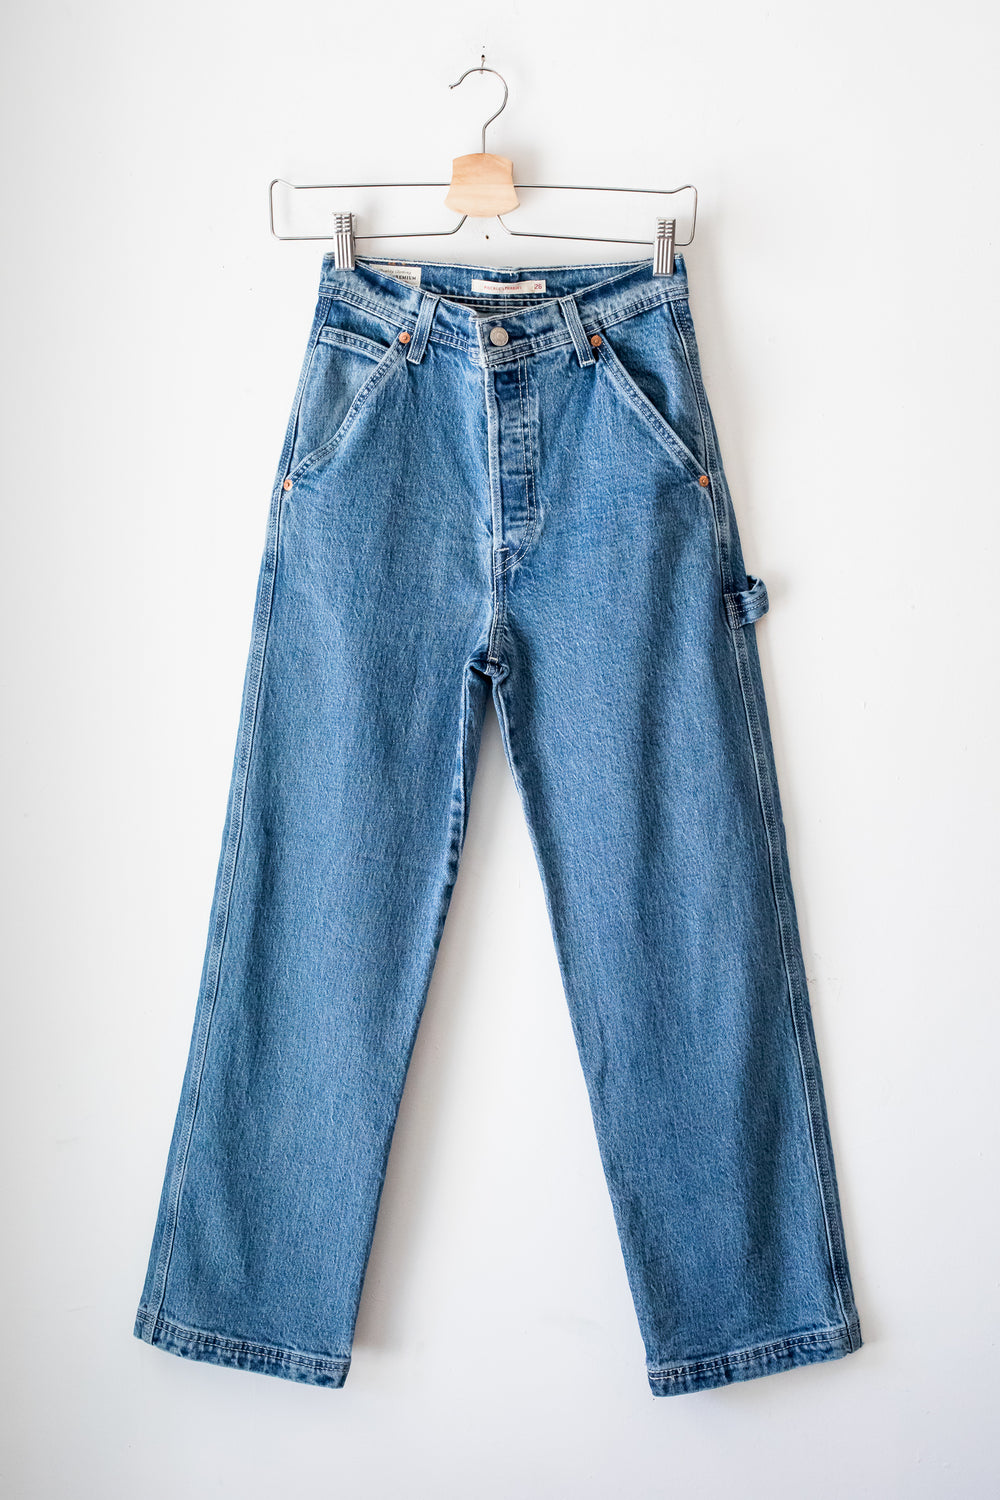 Nine To Five Ribcage Utility Jeans